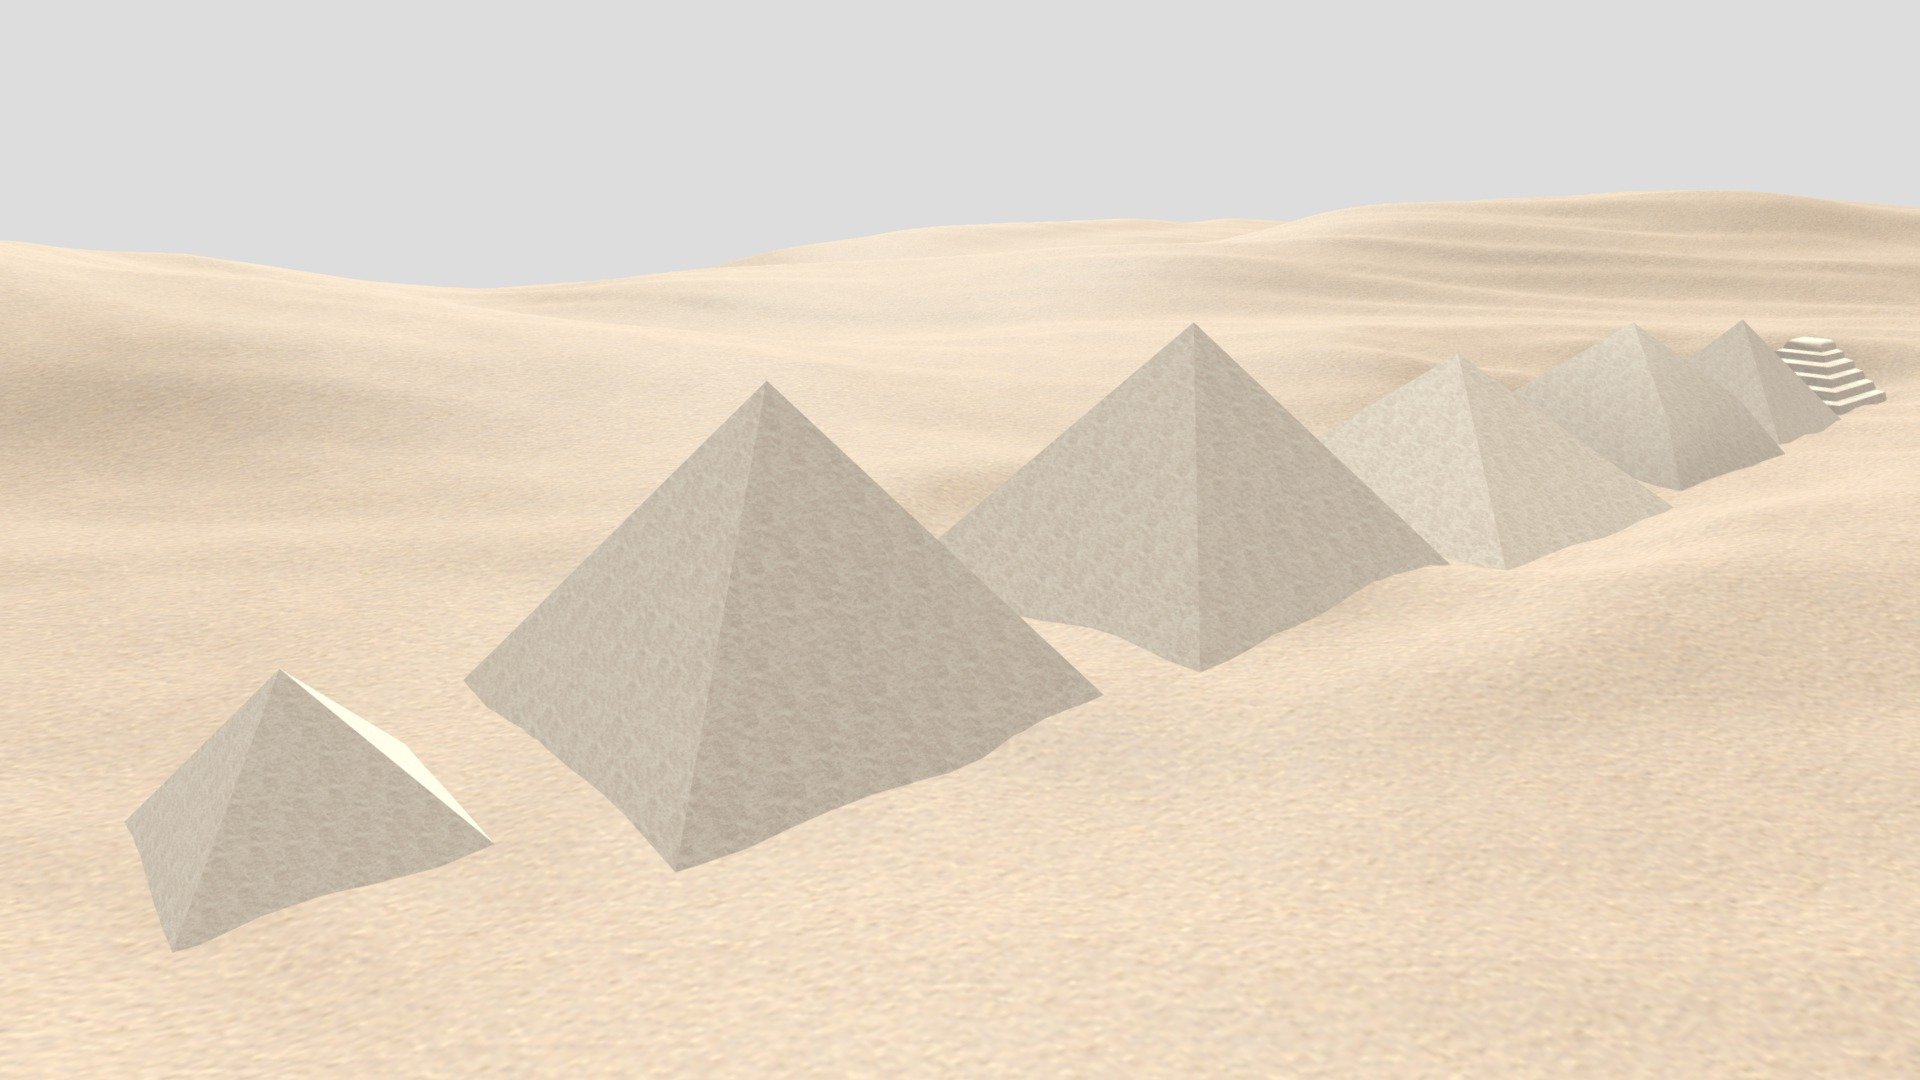 The pyramids of Djoser, Sneferu, Khufu, Khafre, and Menkaure positioned together to scale - Monumental Pyramids of the 3rd and 4th Dynasties - 3D model by wchaparchaeology 3d model